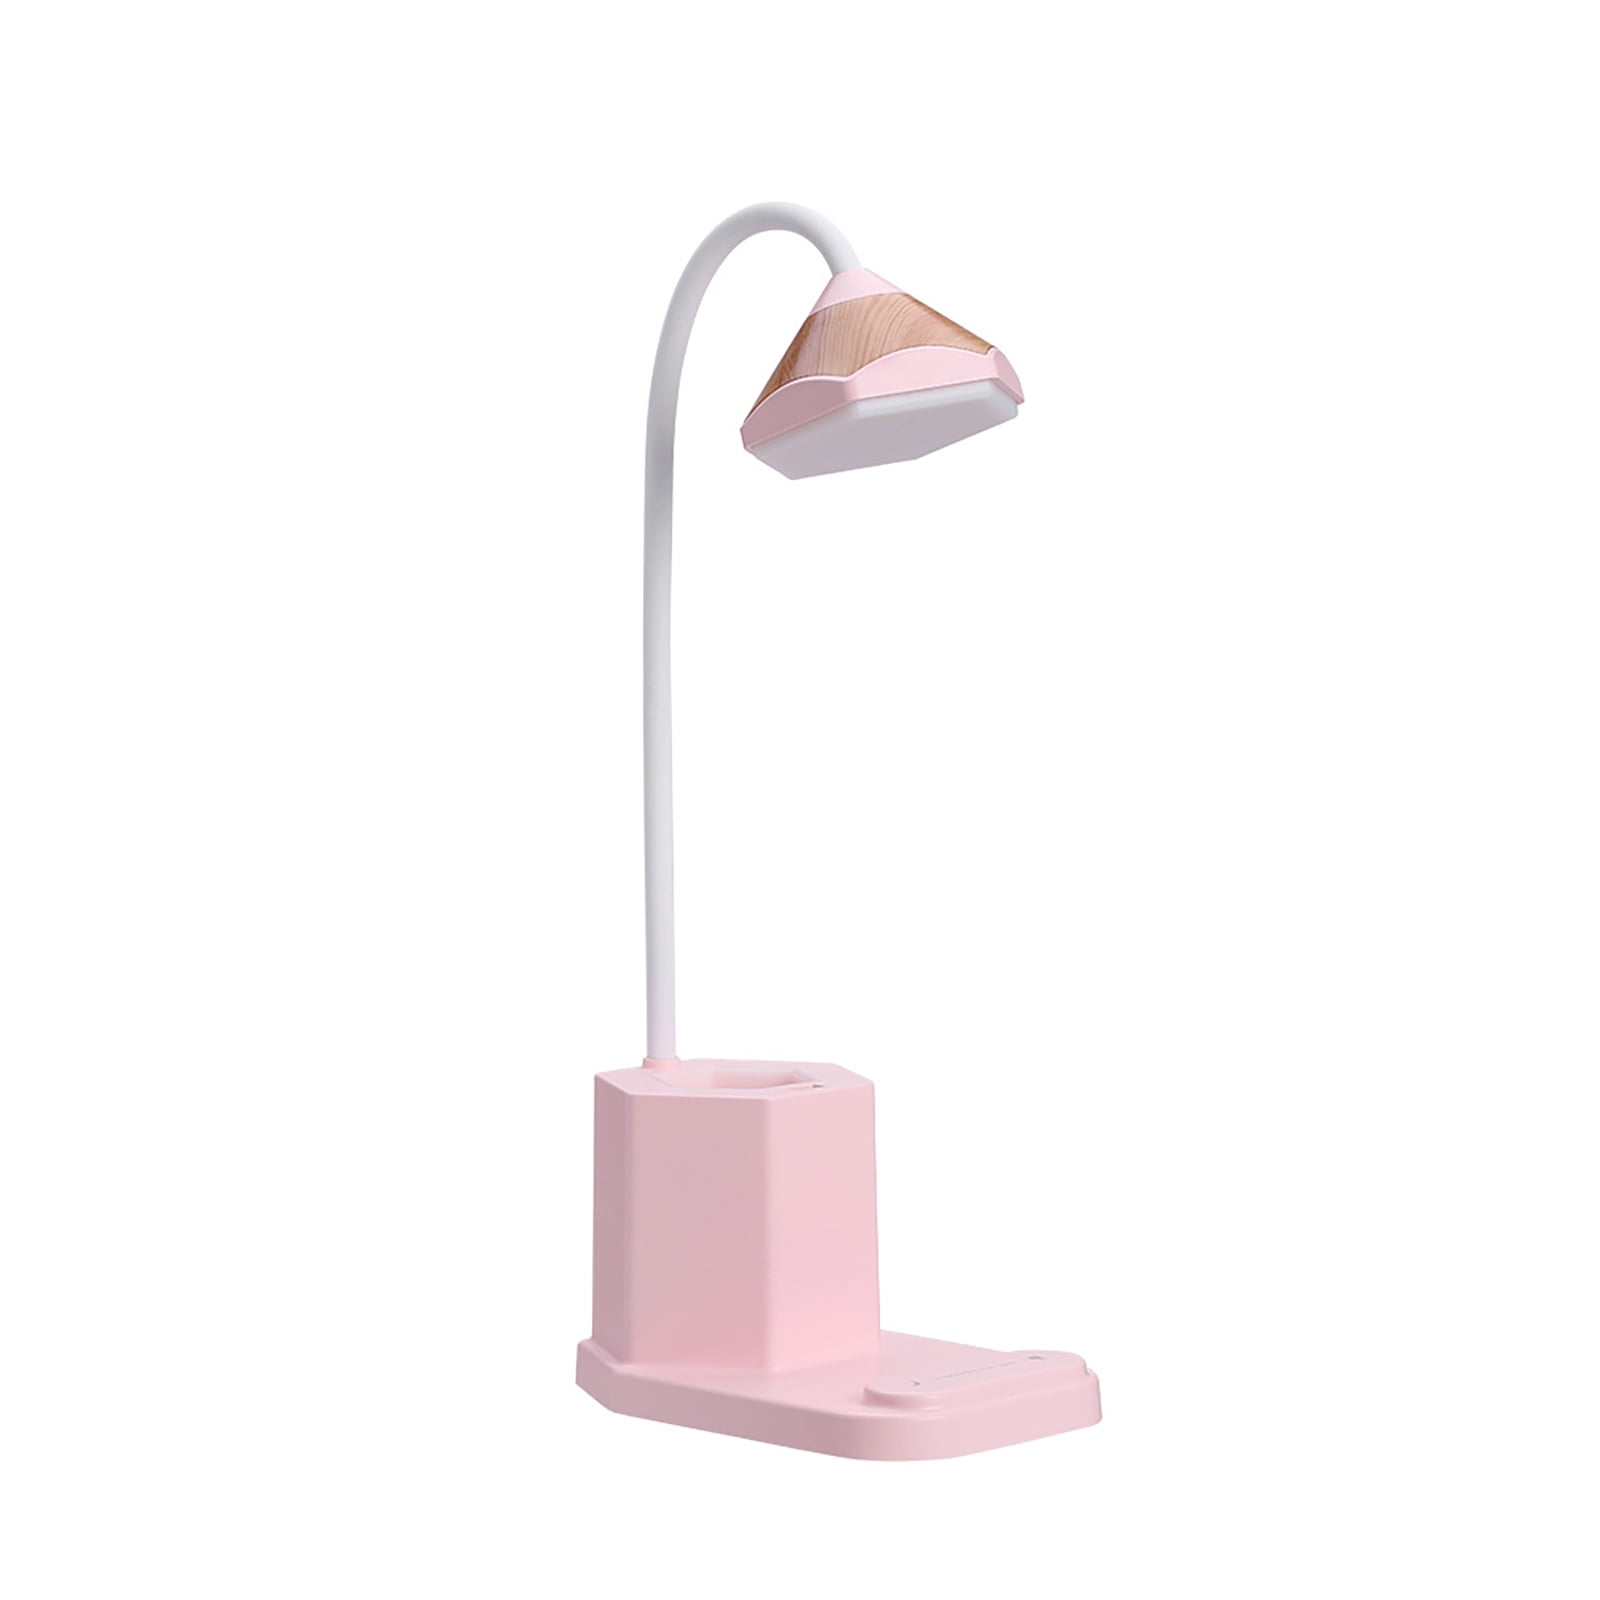 Multifunctional Usb Table Lamp Led, Small Table Reading Light